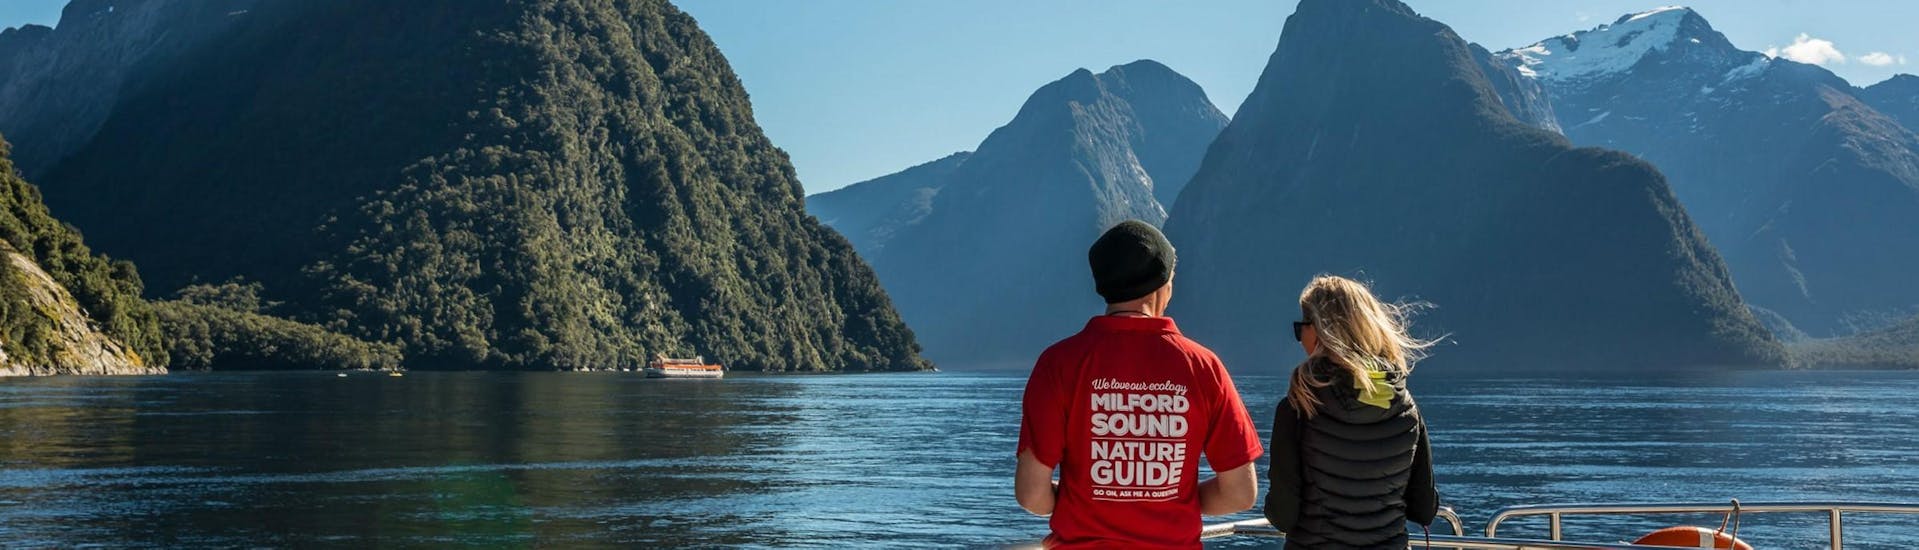 Bootstour - Milford Sound Fjord mit Wildtierbeobachtung.